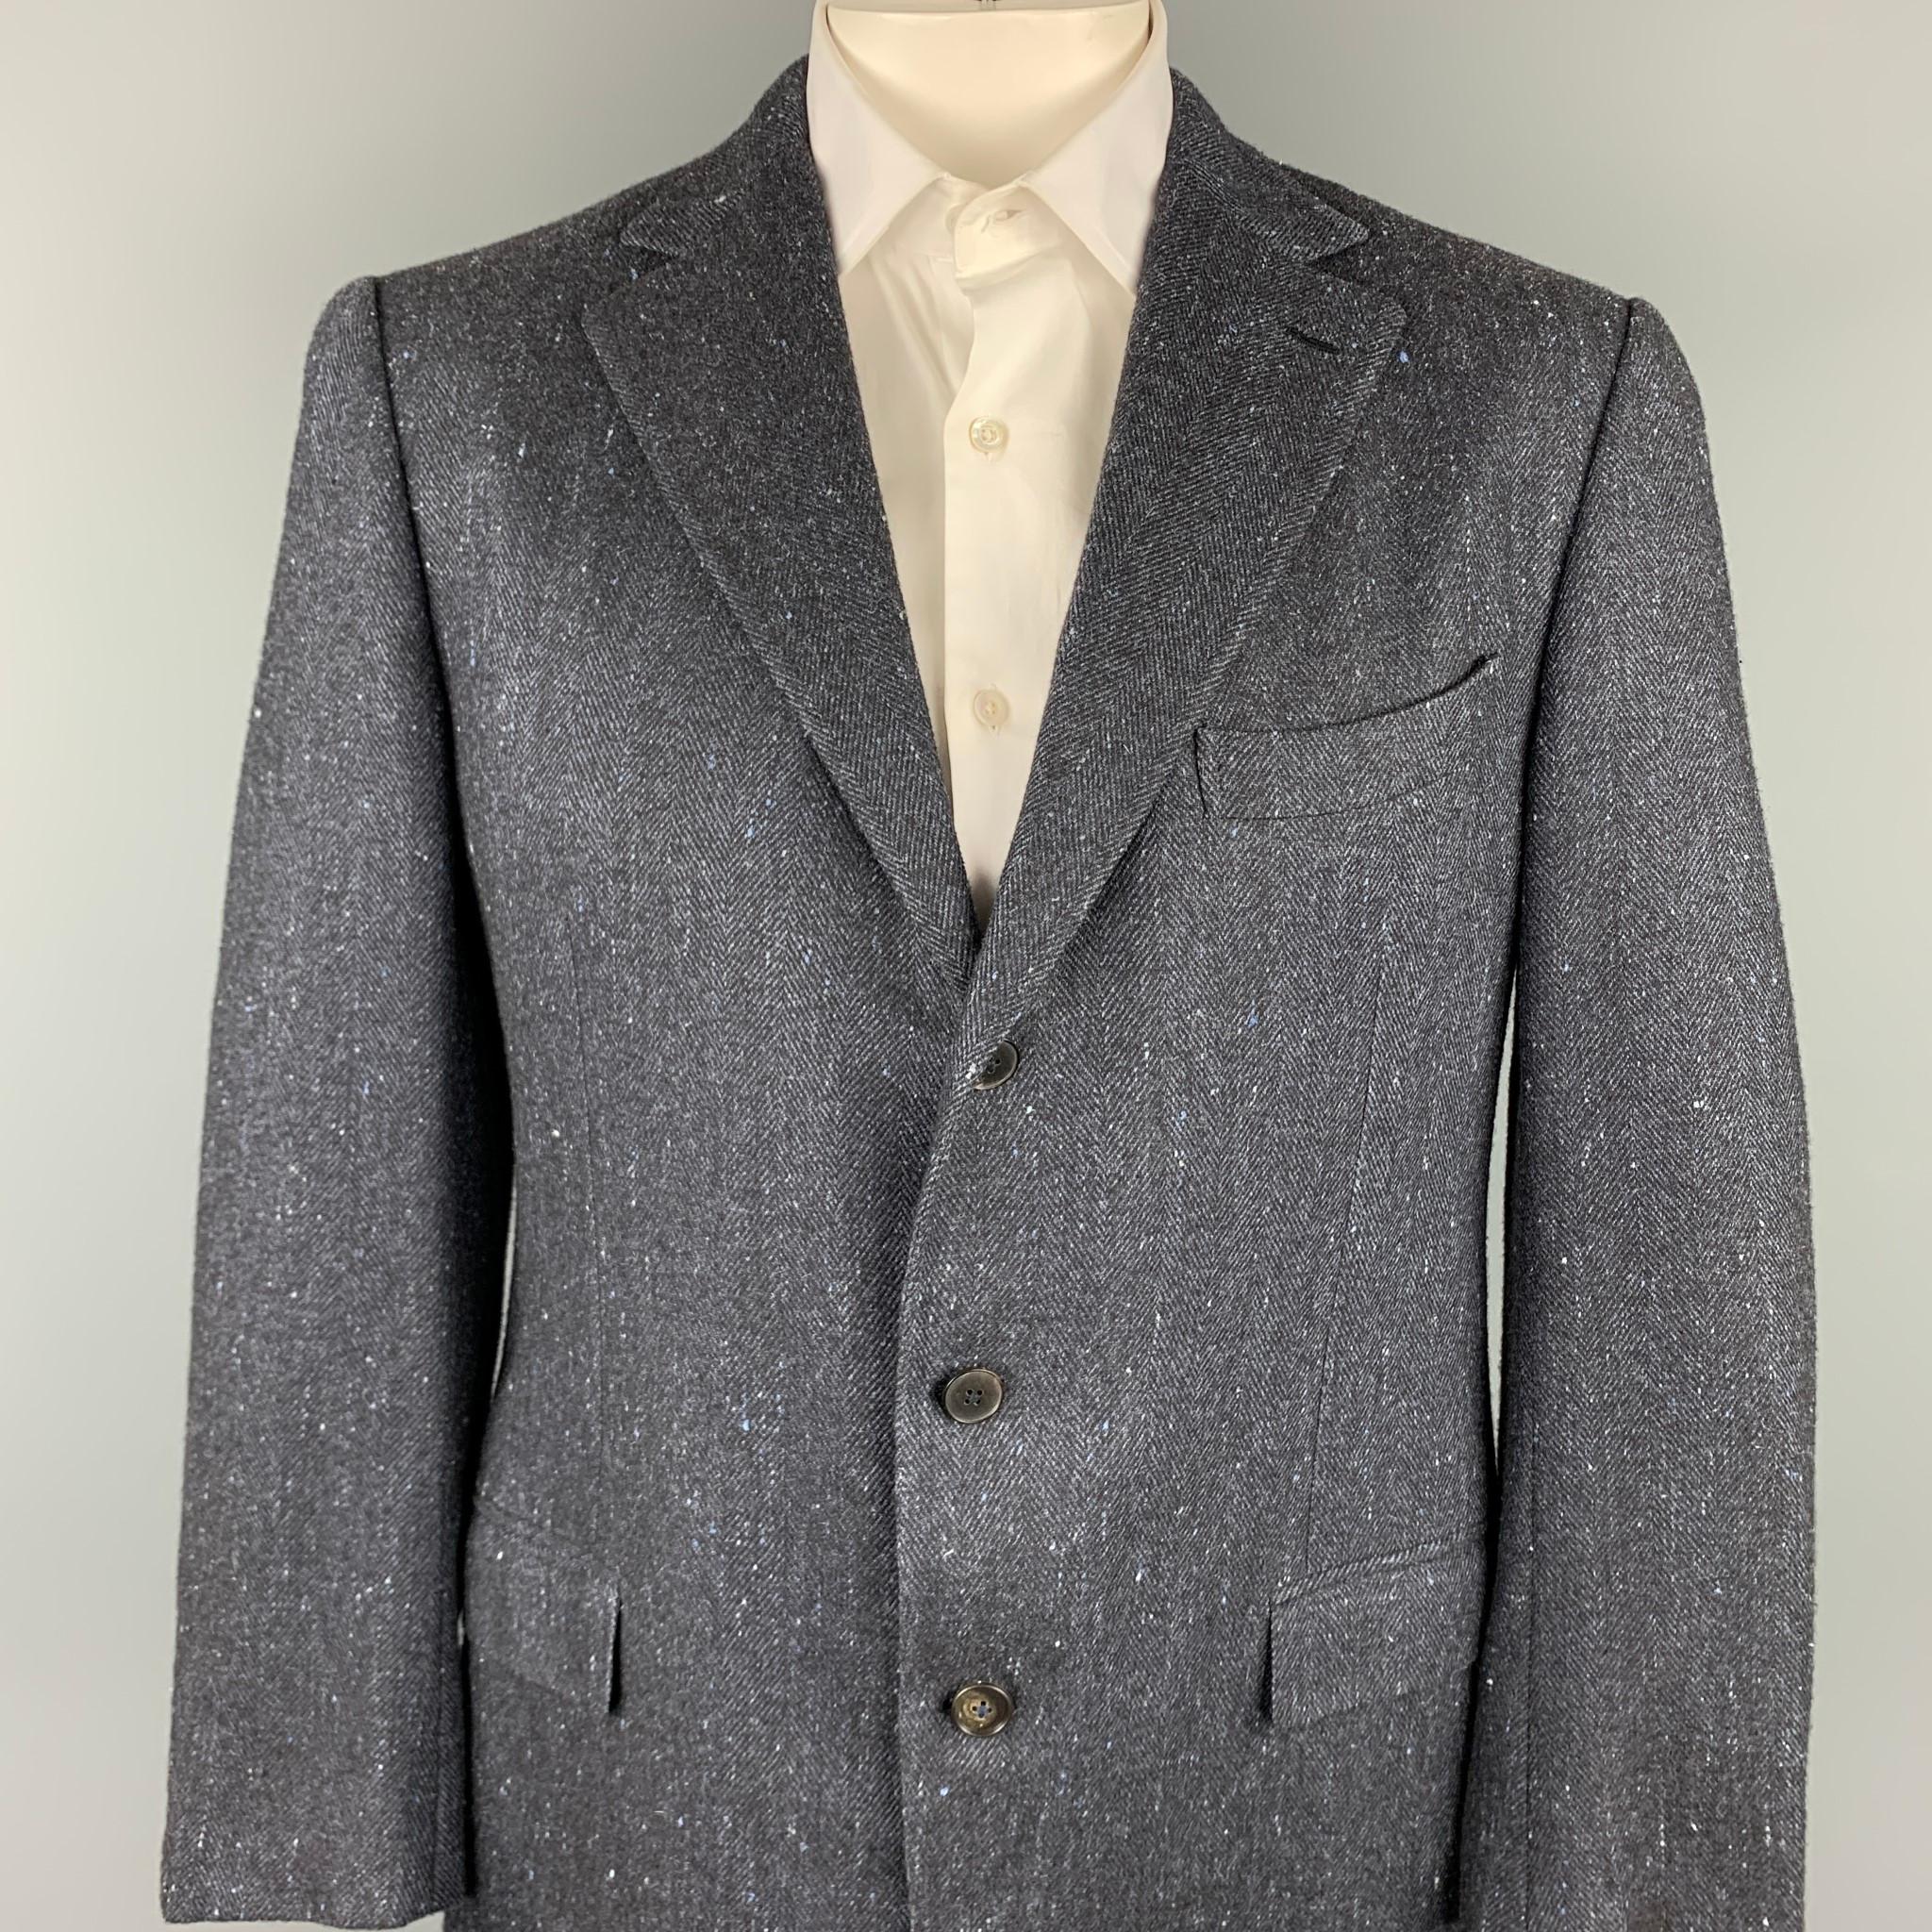 ERMENEGILDO ZEGNA sport coat comes in a navy herringbone cashmere blend with a full liner featuring a notch lapel, flap pockets, and a three button closure. Made in Italy.

Very Good Pre-Owned Condition.
Marked: 54 R

Measurements:

Shoulder: 19